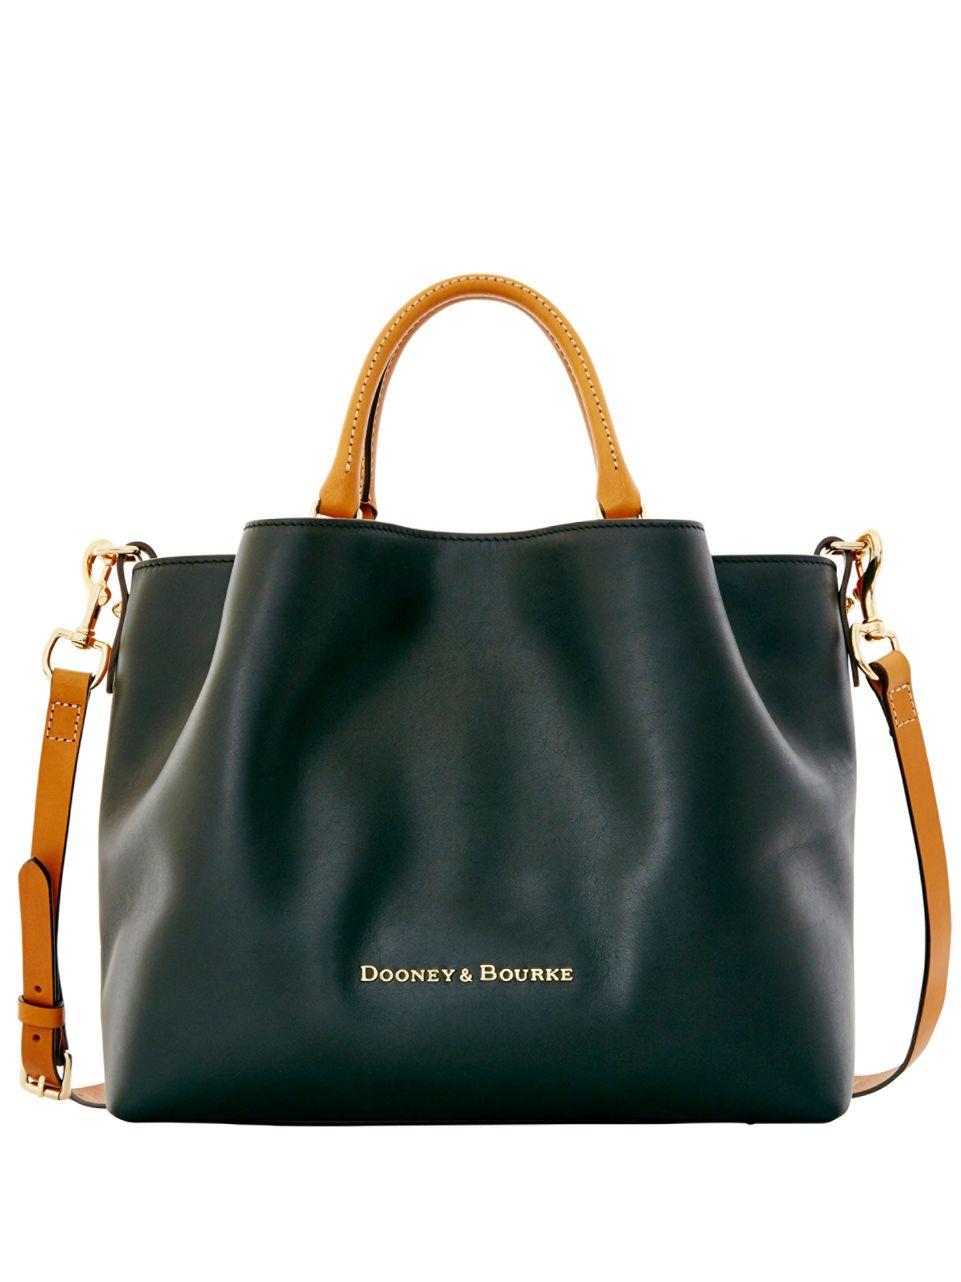 Dooney & bourke City Large Leather Barlow Tote in Black | Lyst